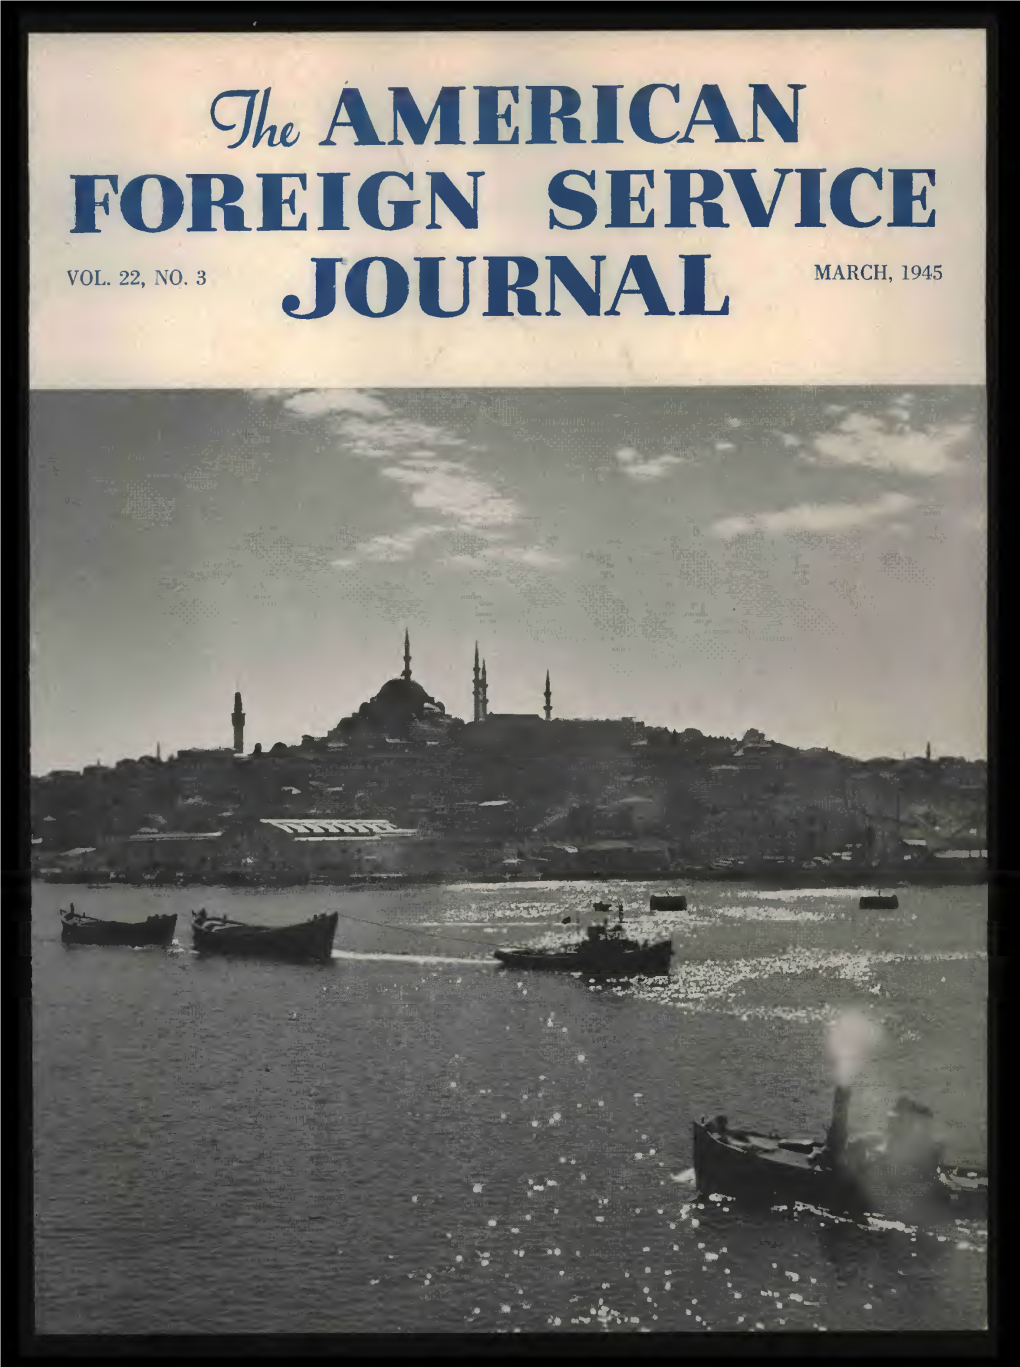 The Foreign Service Journal, March 1945